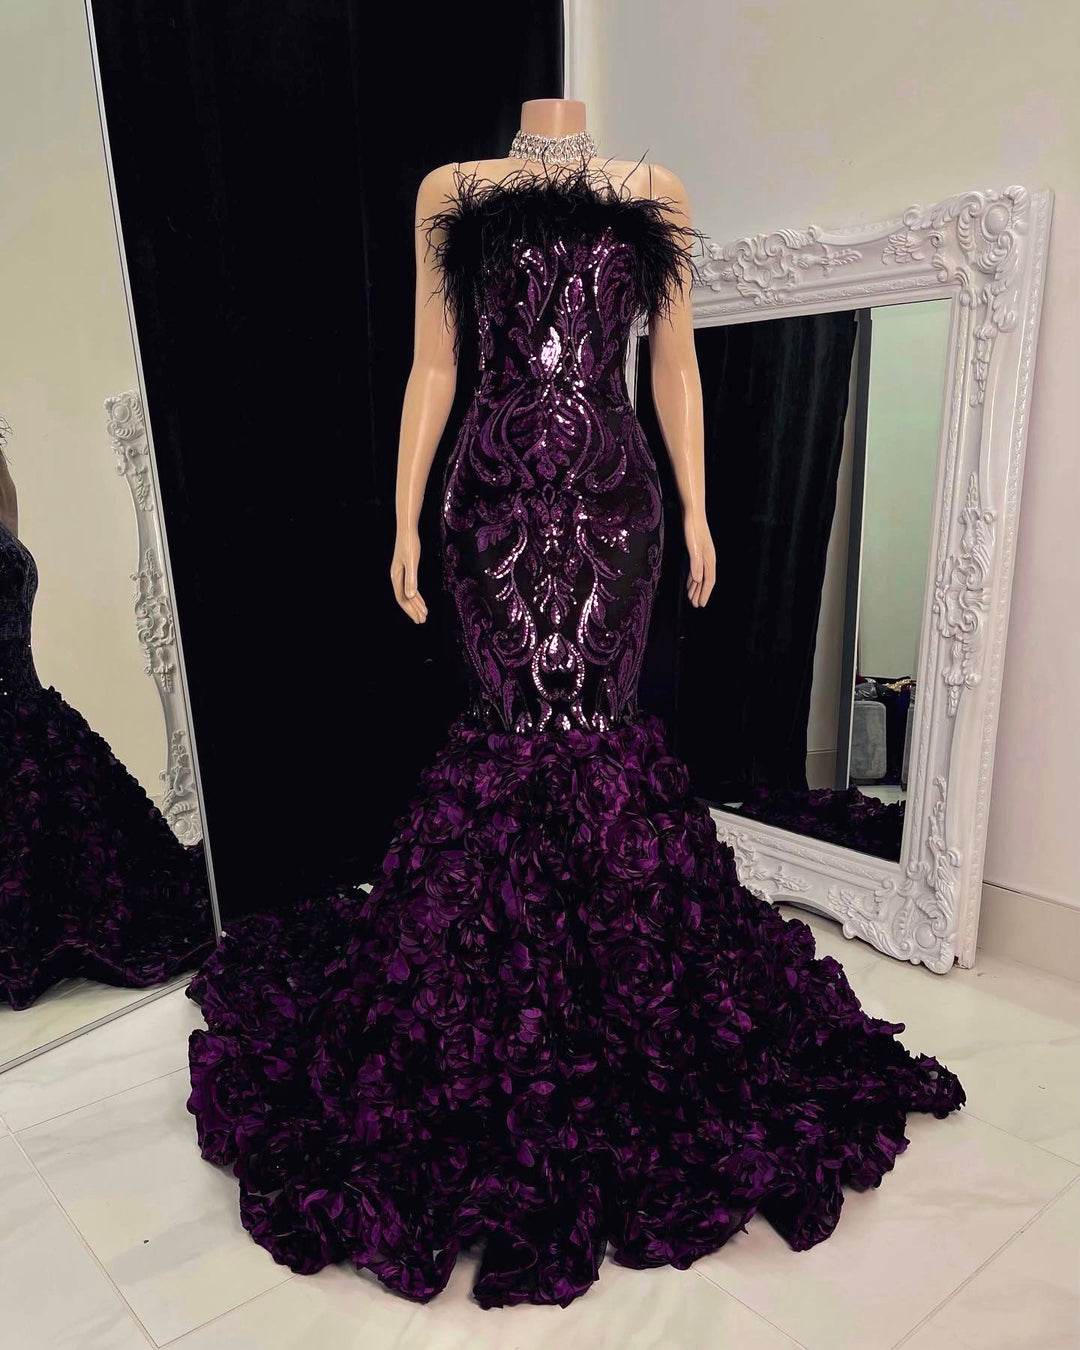 The Brianna Gown